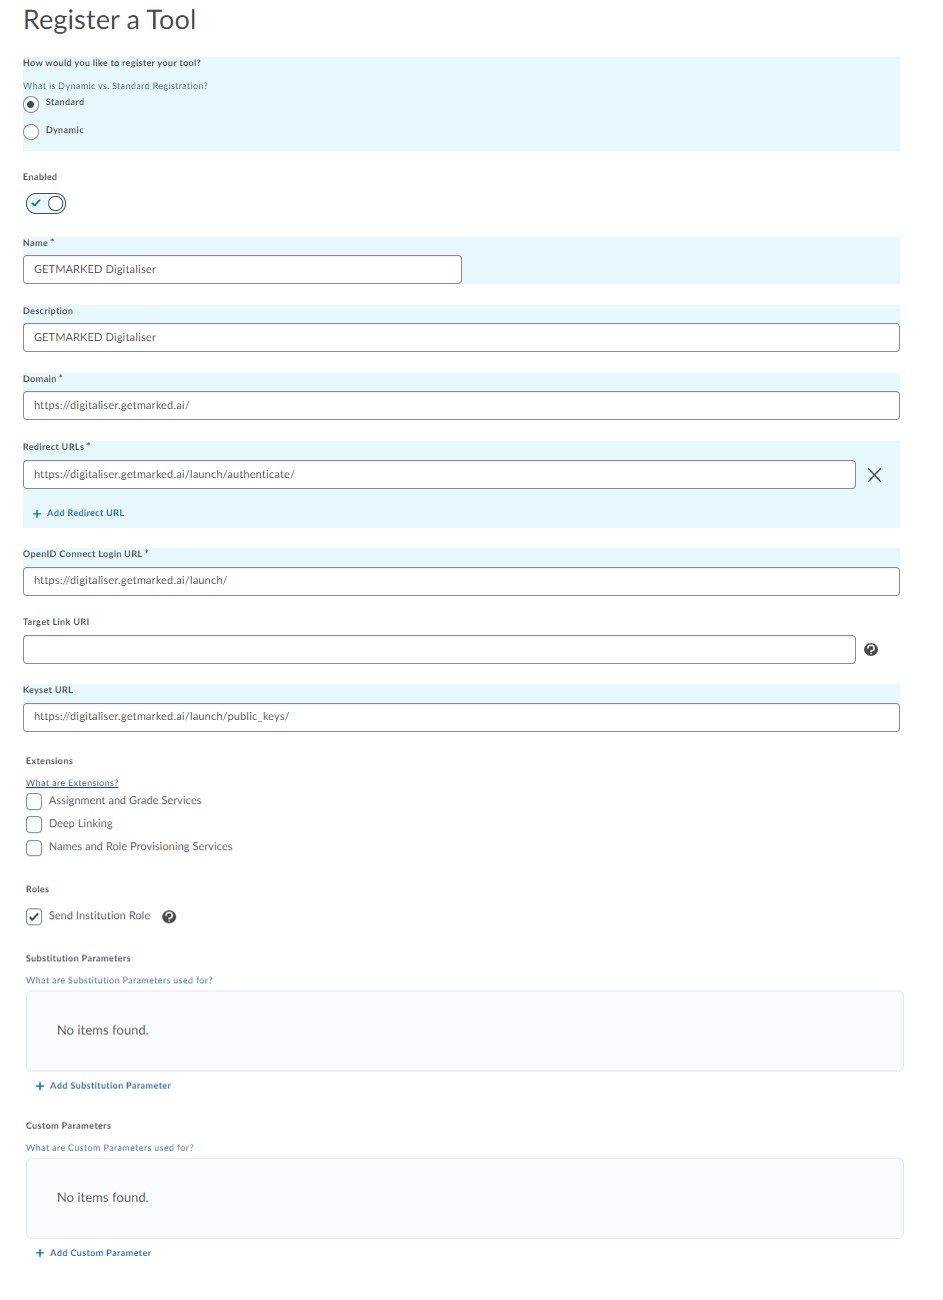 brightspace register tool form filled